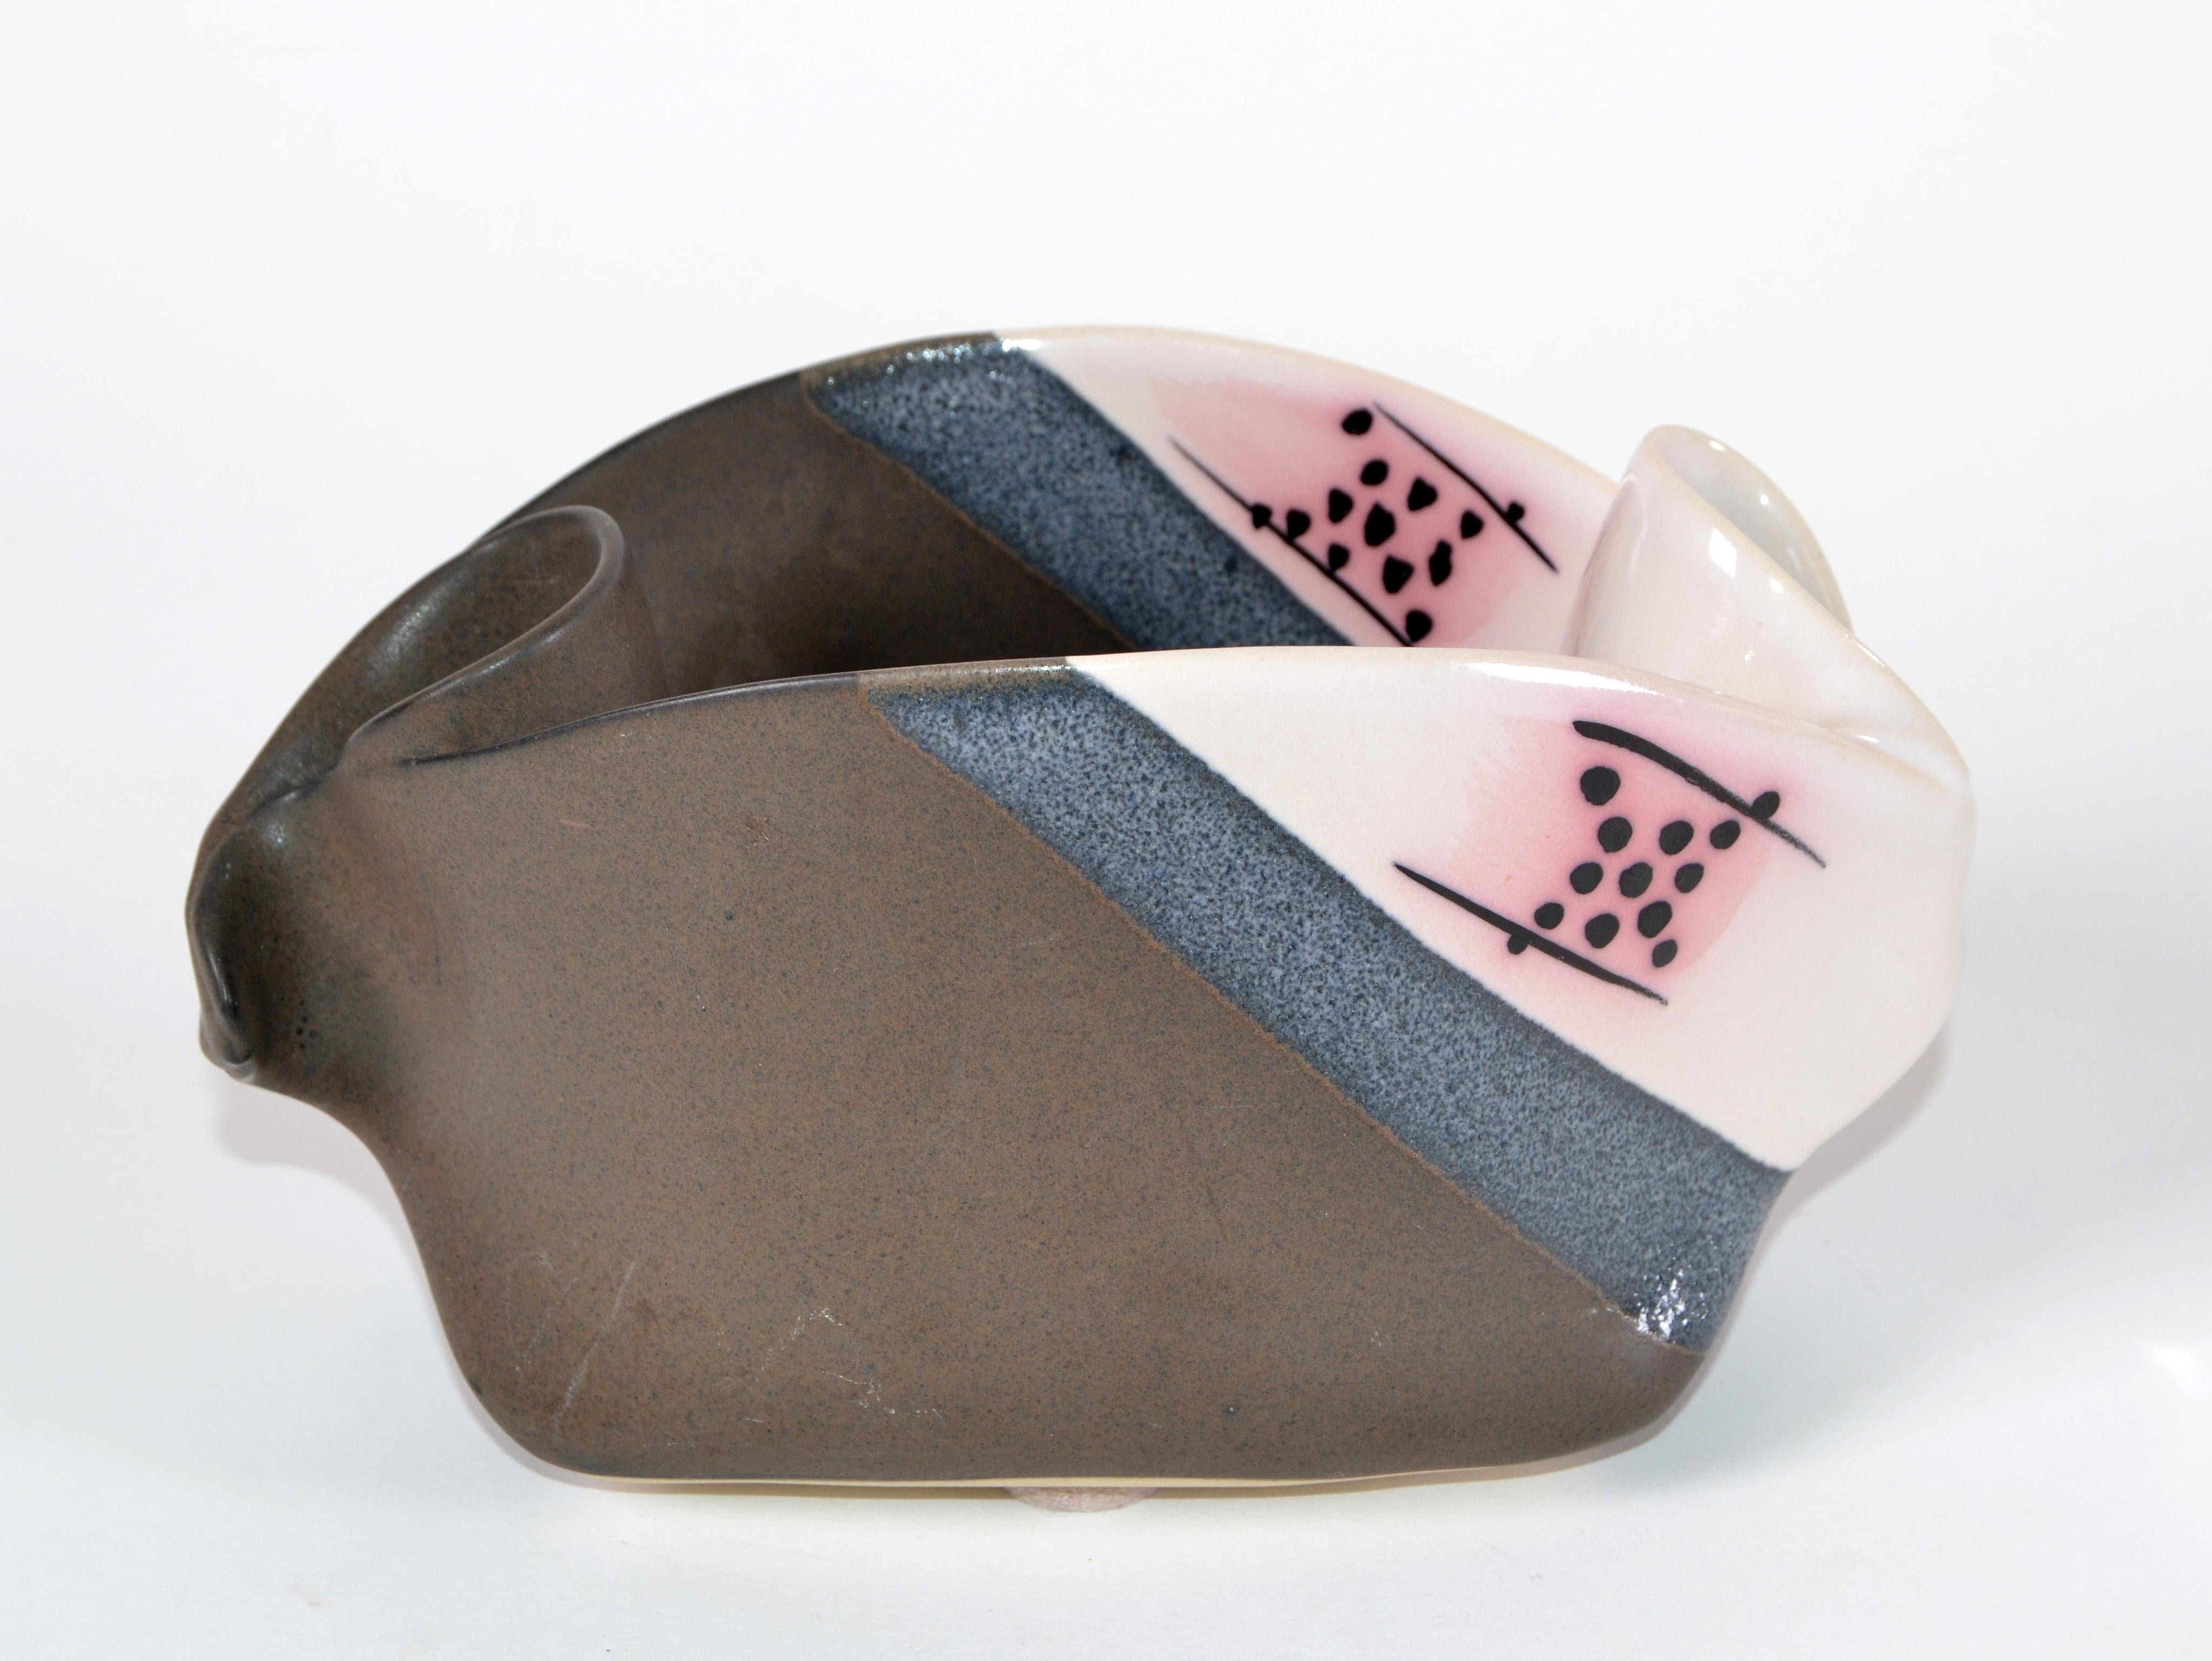 One of a kind Mid-Century Modern freeform glazed ceramic bowl, pottery in gray, blue pink and black color.
Superb crafted in Canada in the 1970s.
Original label underneath.